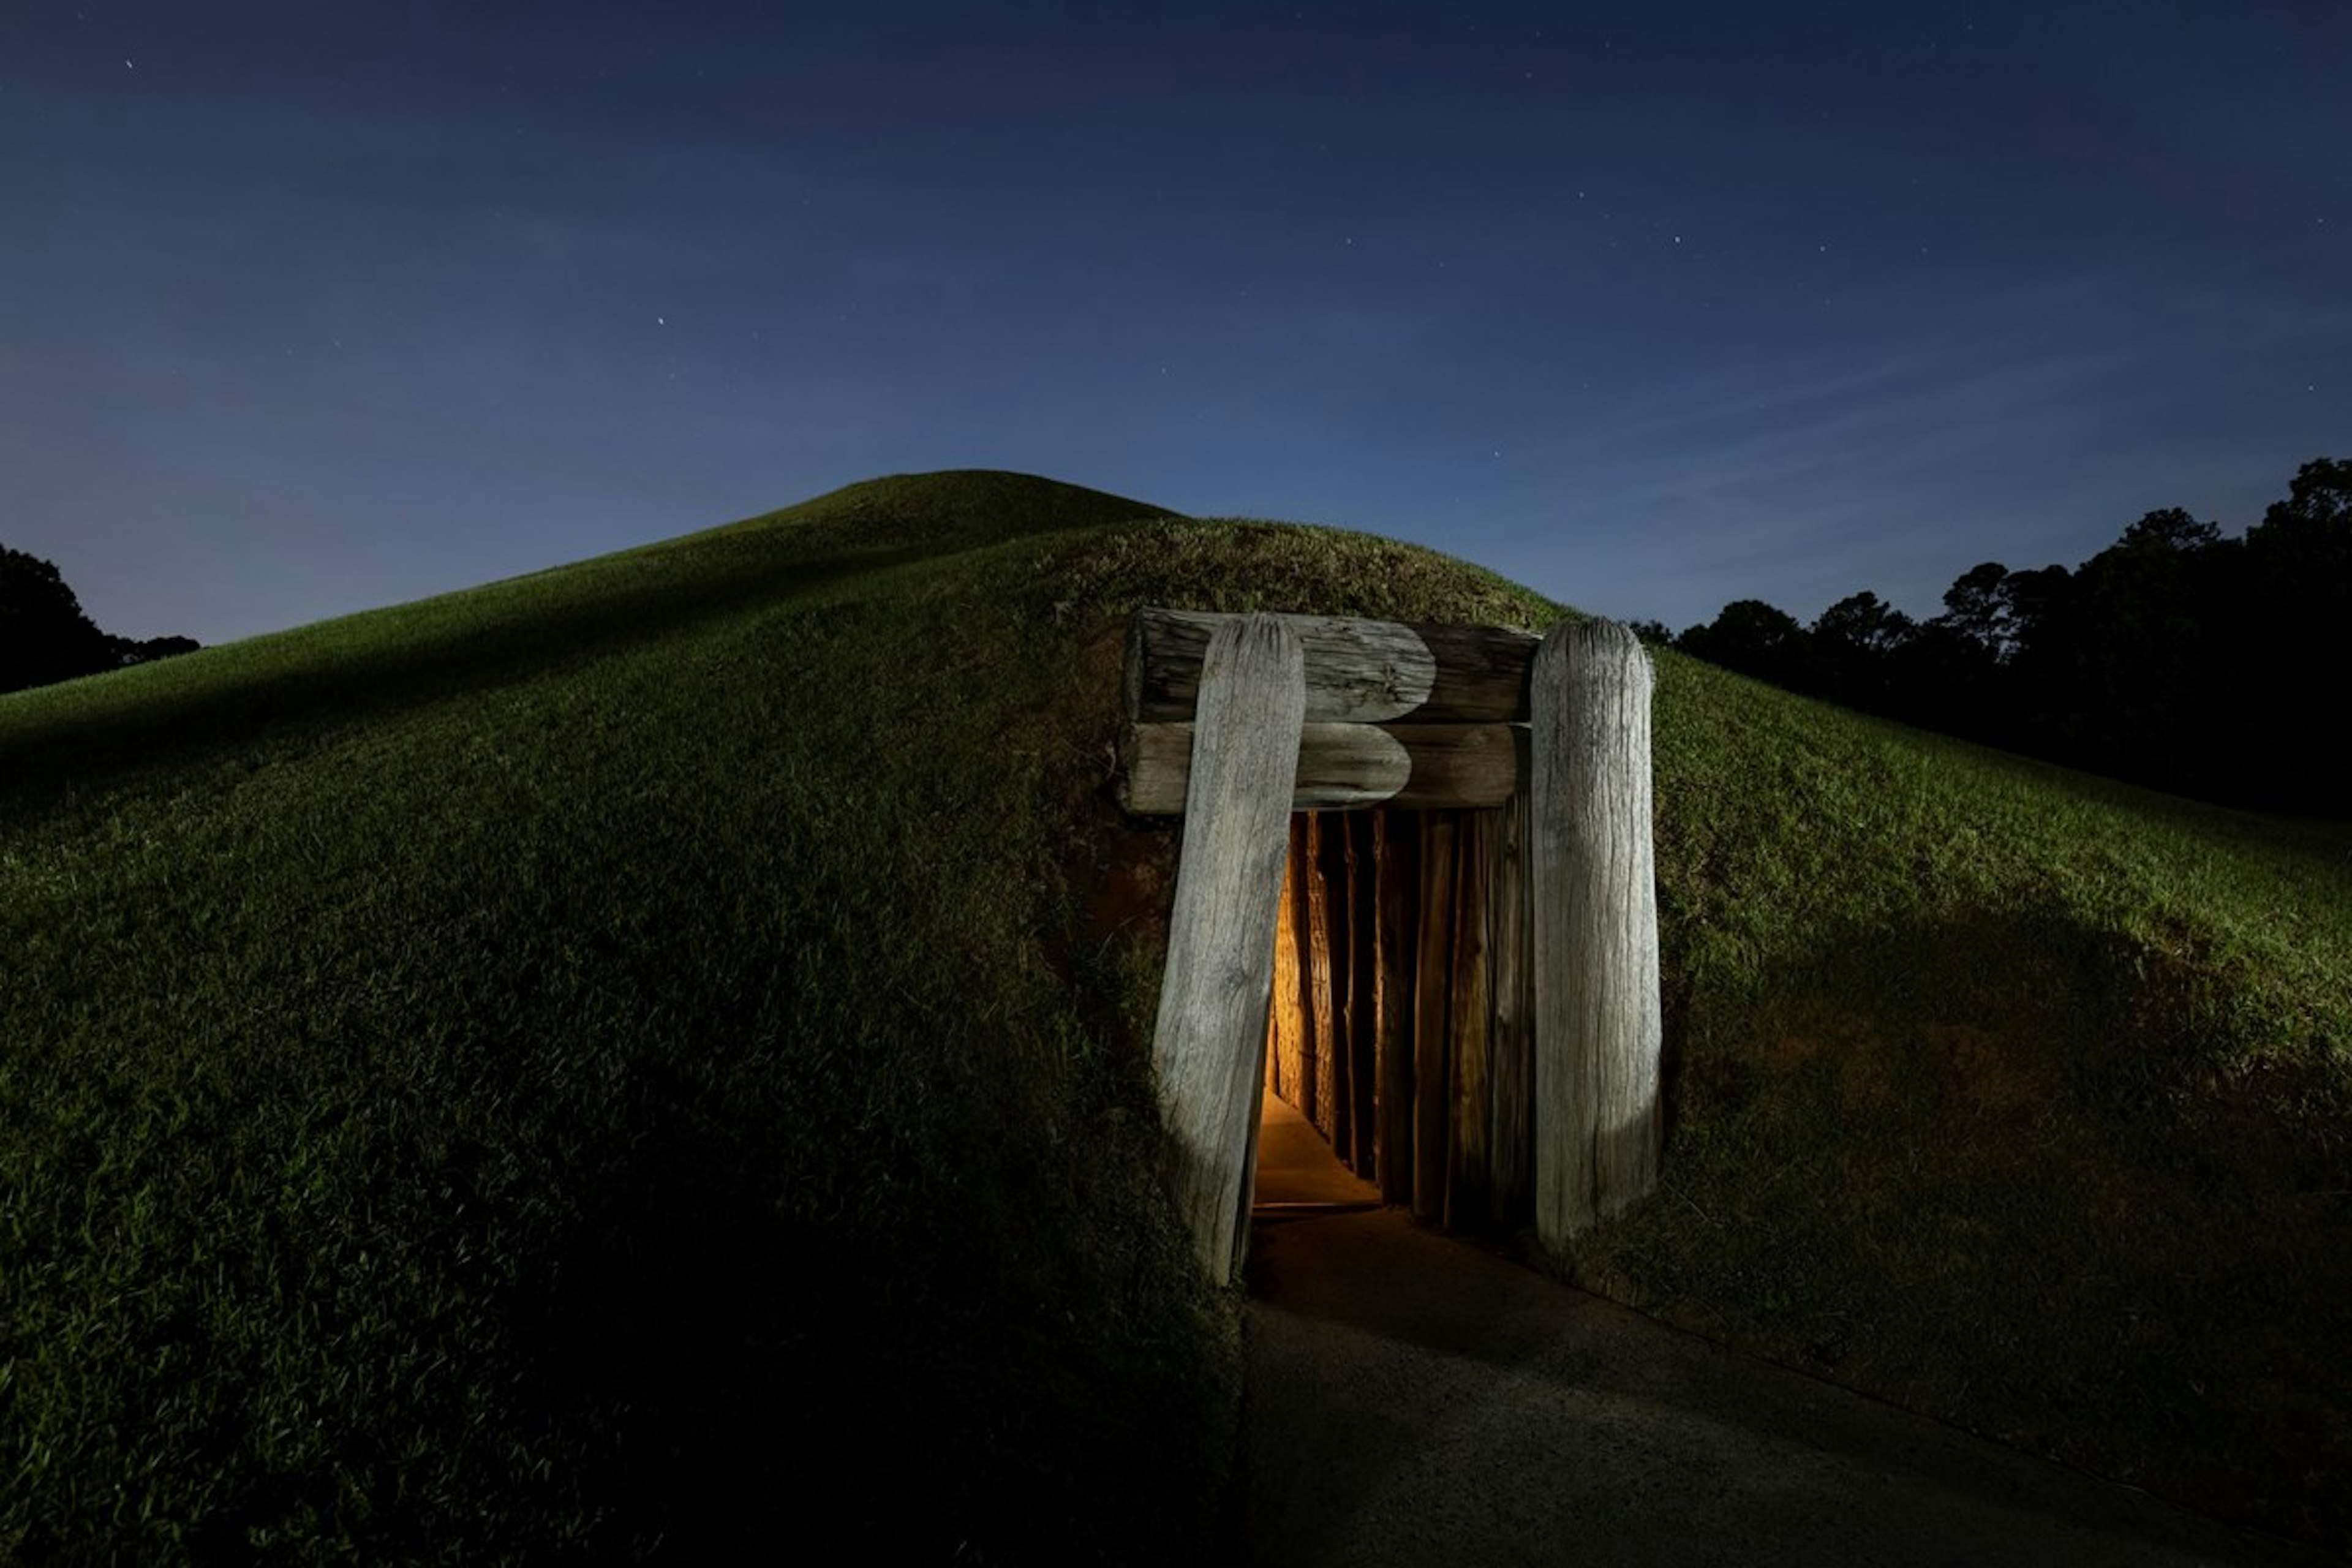 Exterior of the Earth Lodge at Ocmulgee Mounds National Historical Park